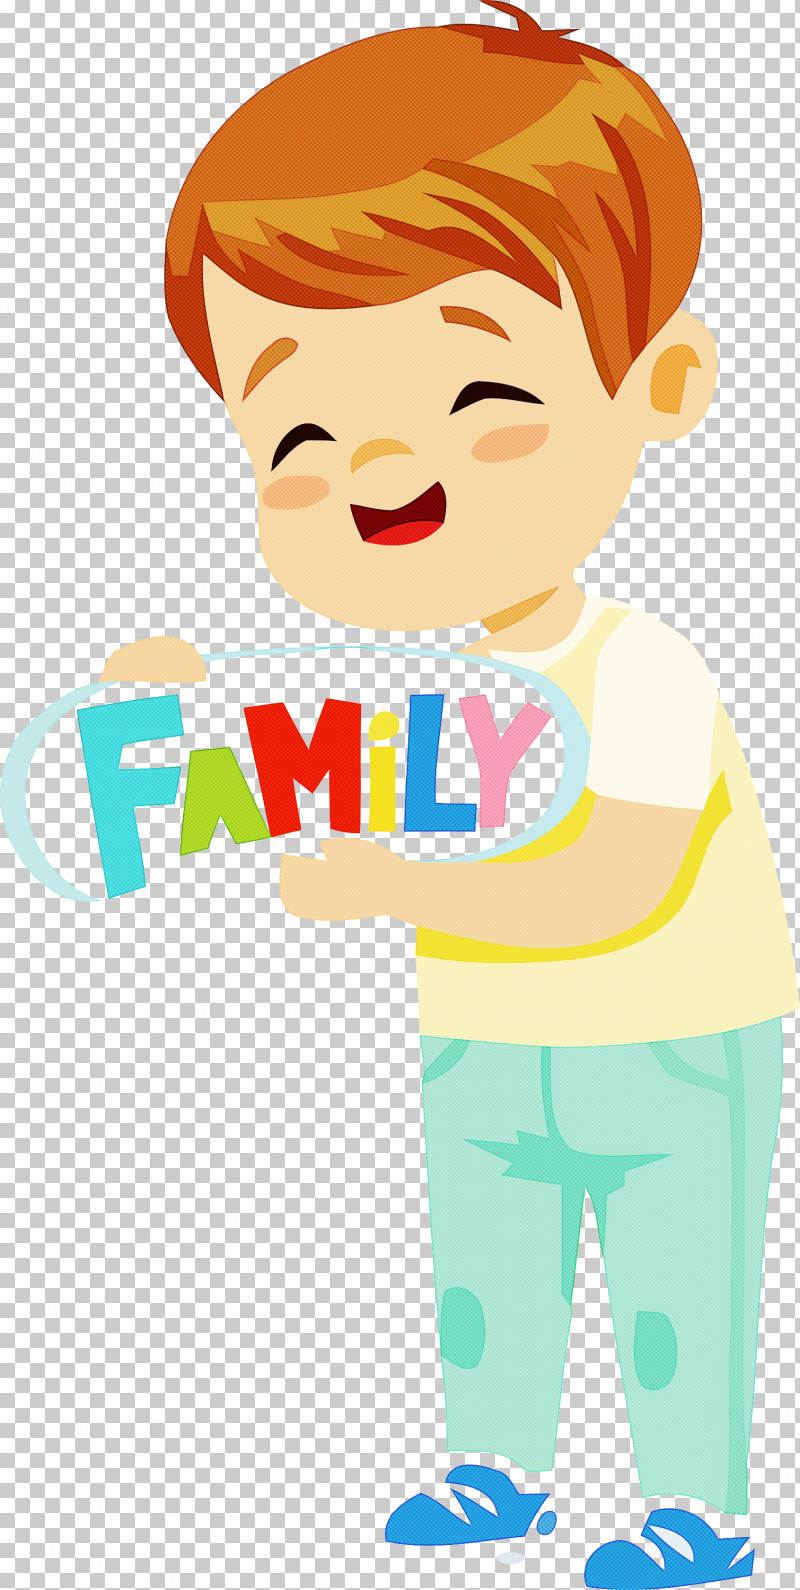 Cartoon Child Happy Toddler PNG, Clipart, Cartoon, Child, Happy, Toddler Free PNG Download